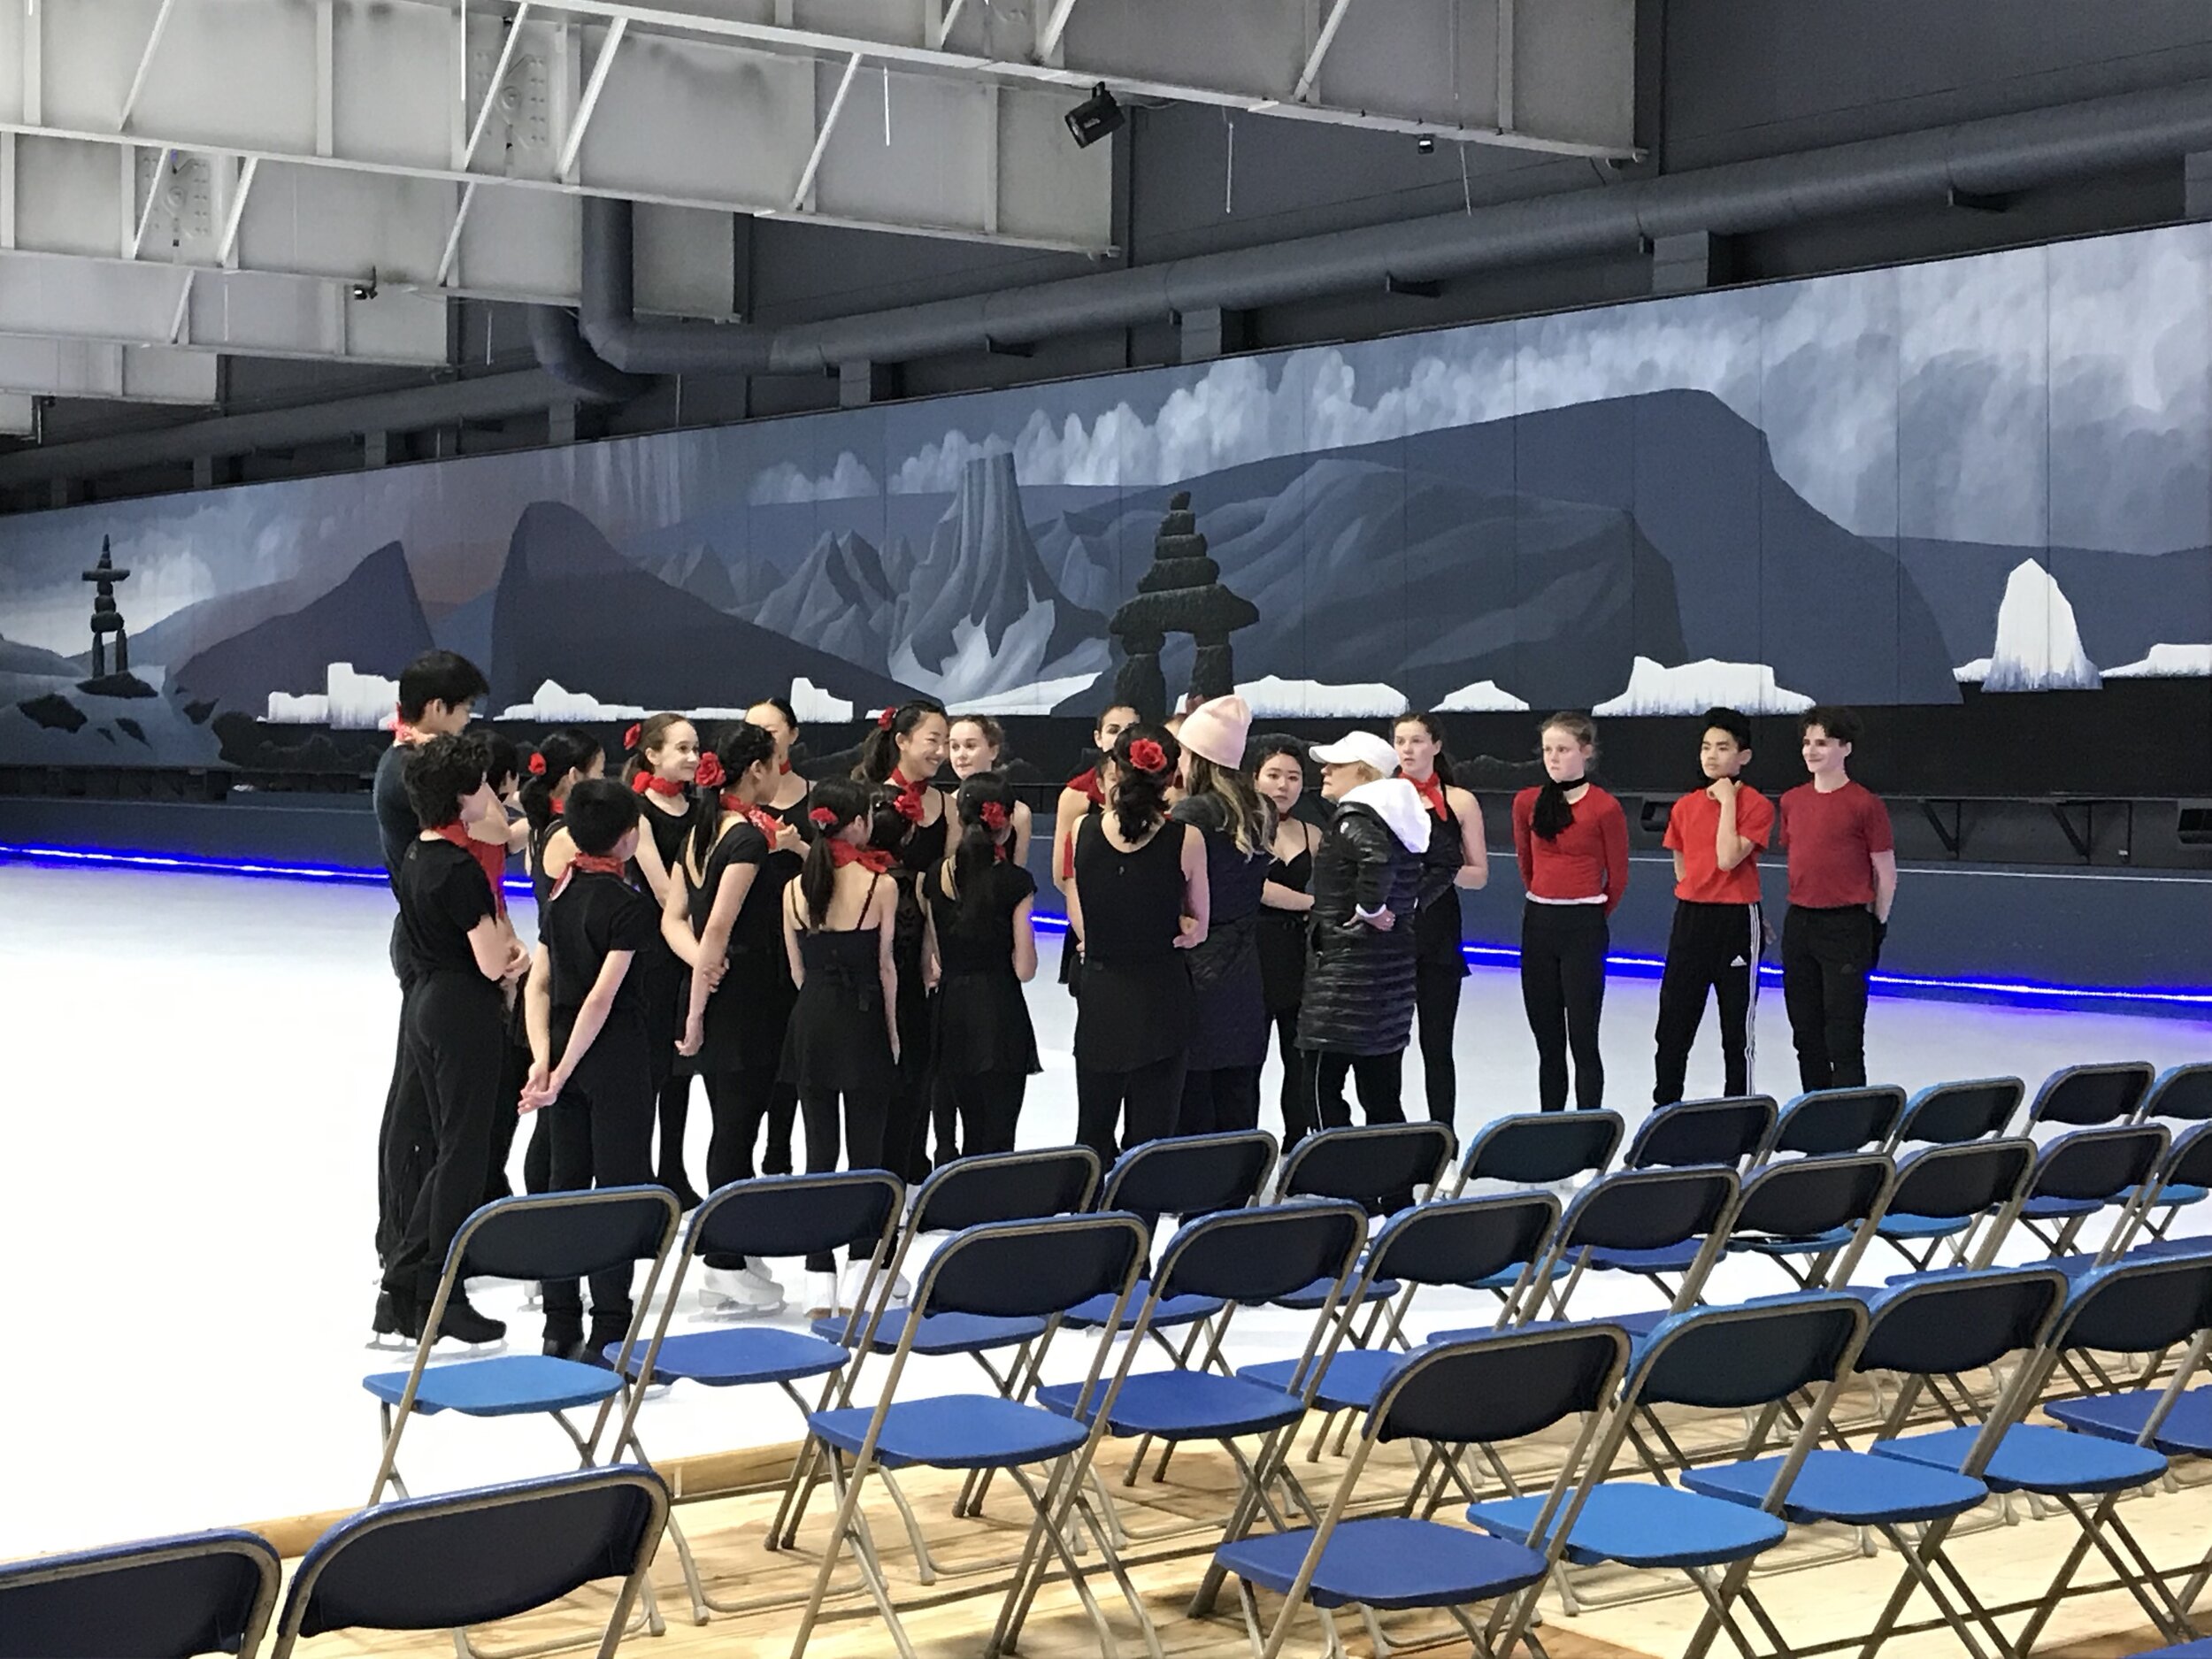  Joanne and Jill working with the Sr A/Advanced Ensemble group during the 2019 Champs Ice Gala 